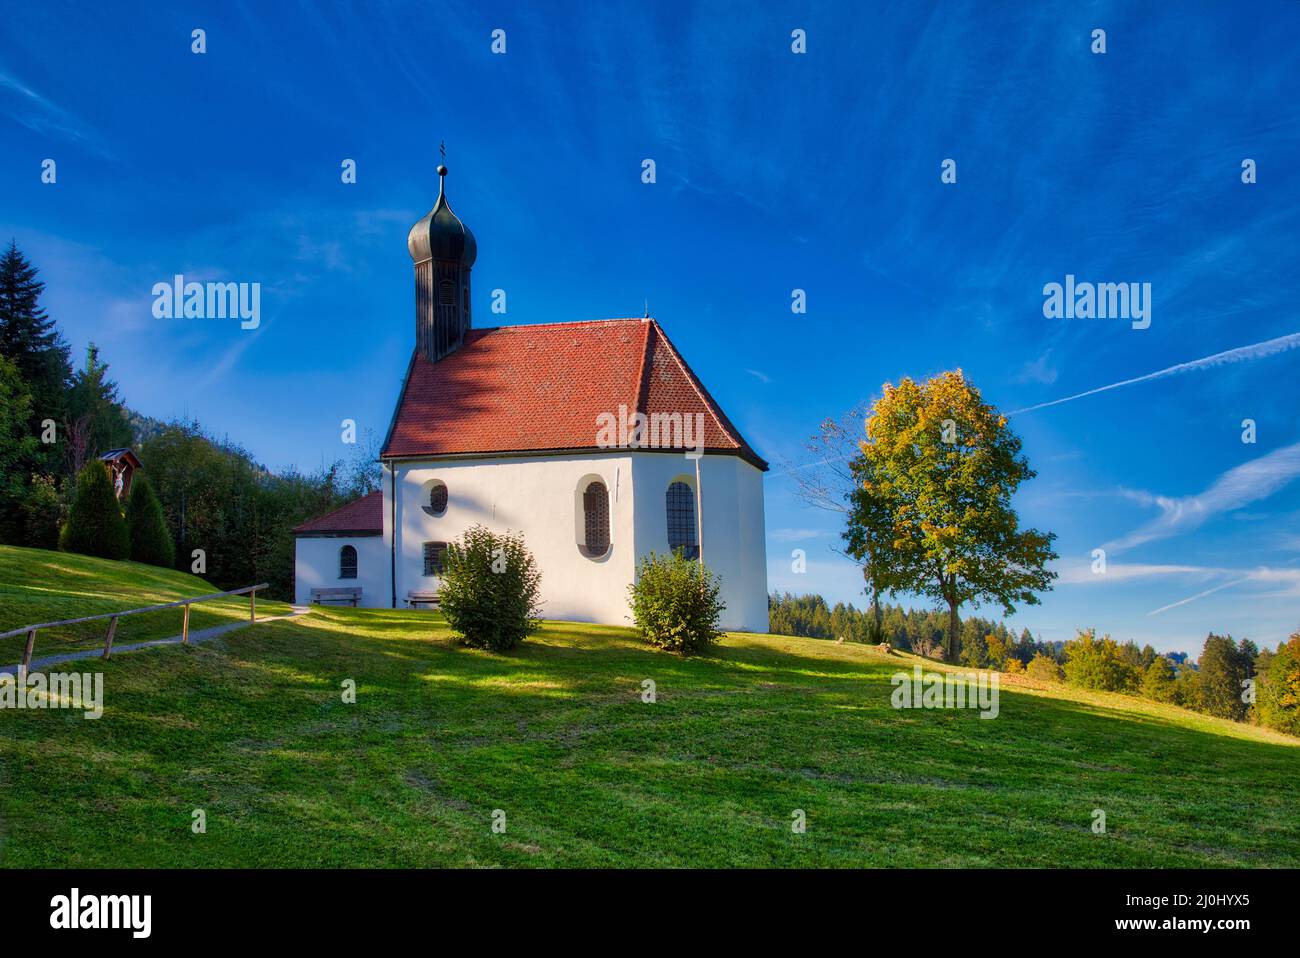 DE - BAVARIA: The historic Pestkapelle in rememberance of the plague during 1634/35 at Wackersberg near Bad Toelz  (HDR-Image) Stock Photo